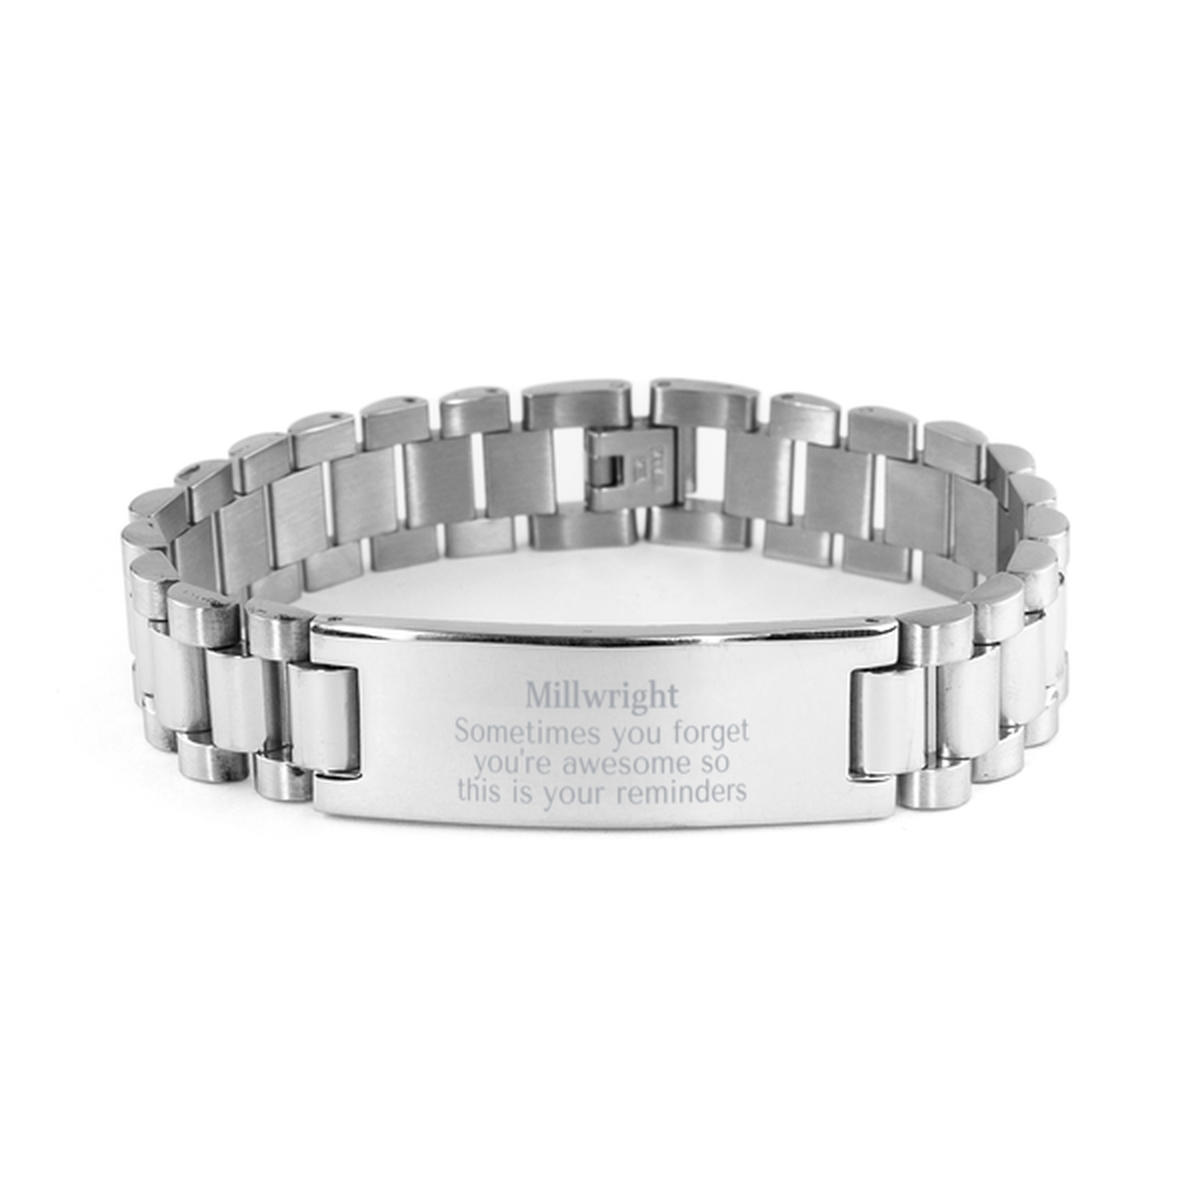 Sentimental Millwright Ladder Stainless Steel Bracelet, Millwright Sometimes you forget you're awesome so this is your reminders, Graduation Christmas Birthday Gifts for Millwright, Men, Women, Coworkers